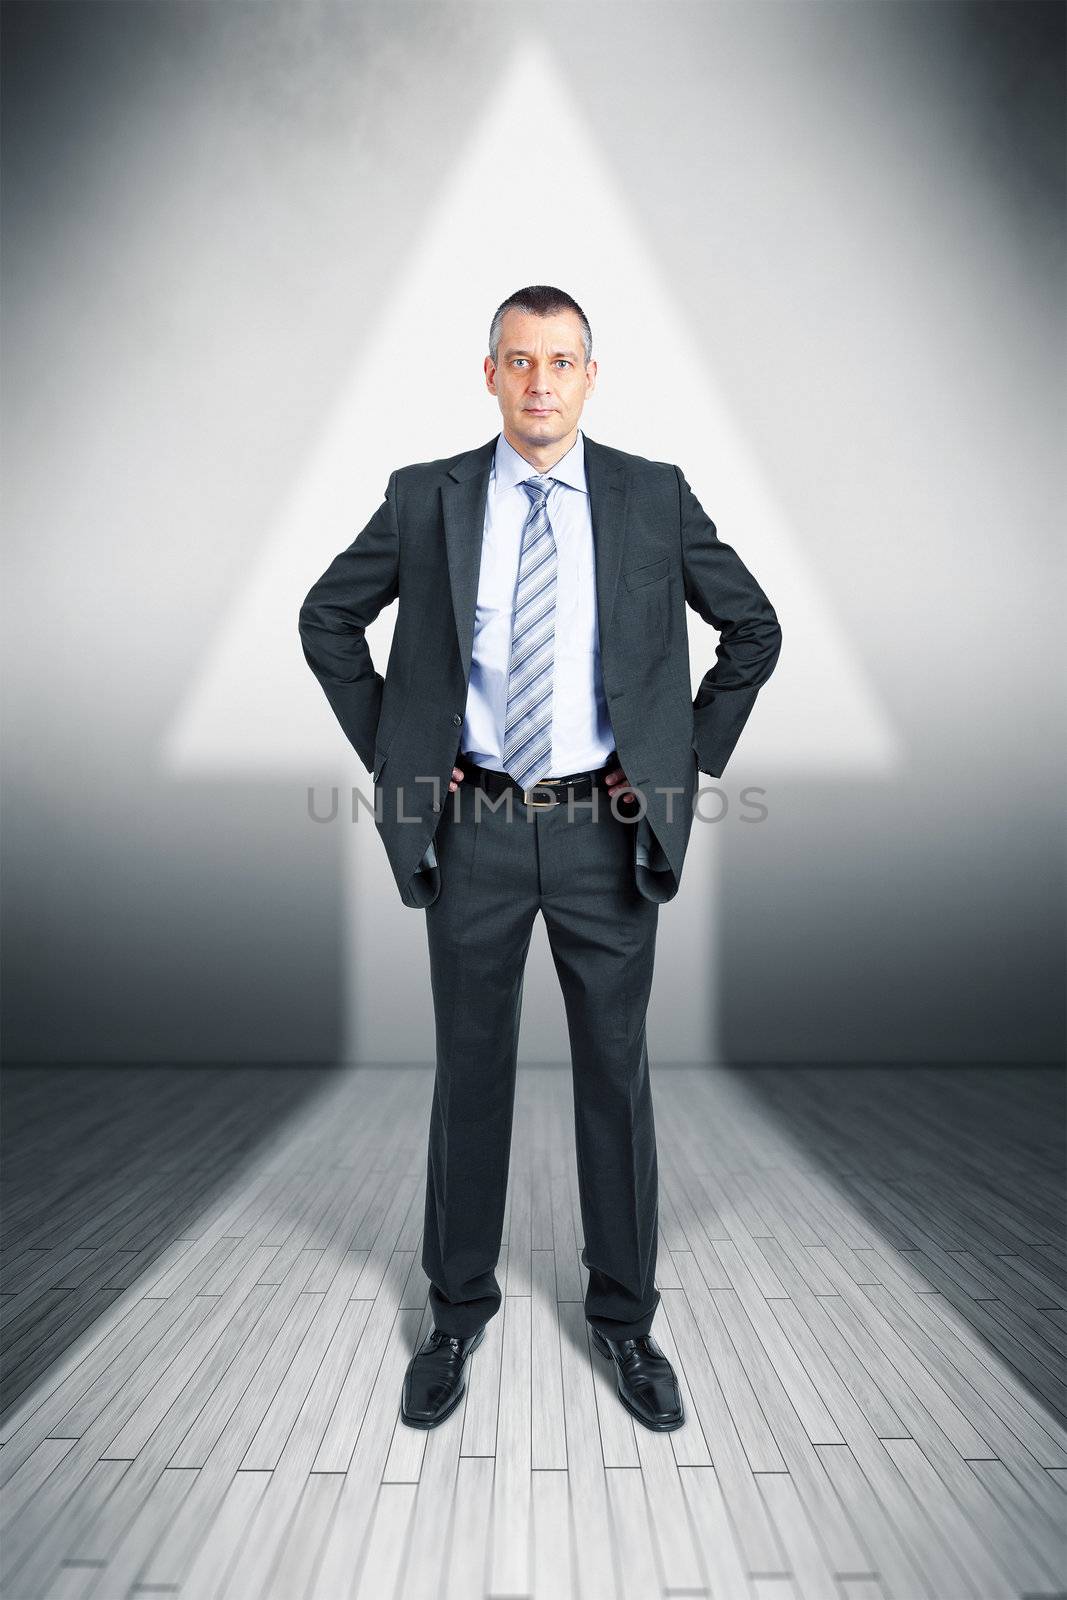 An image of a manager in a arrow shape light upwards